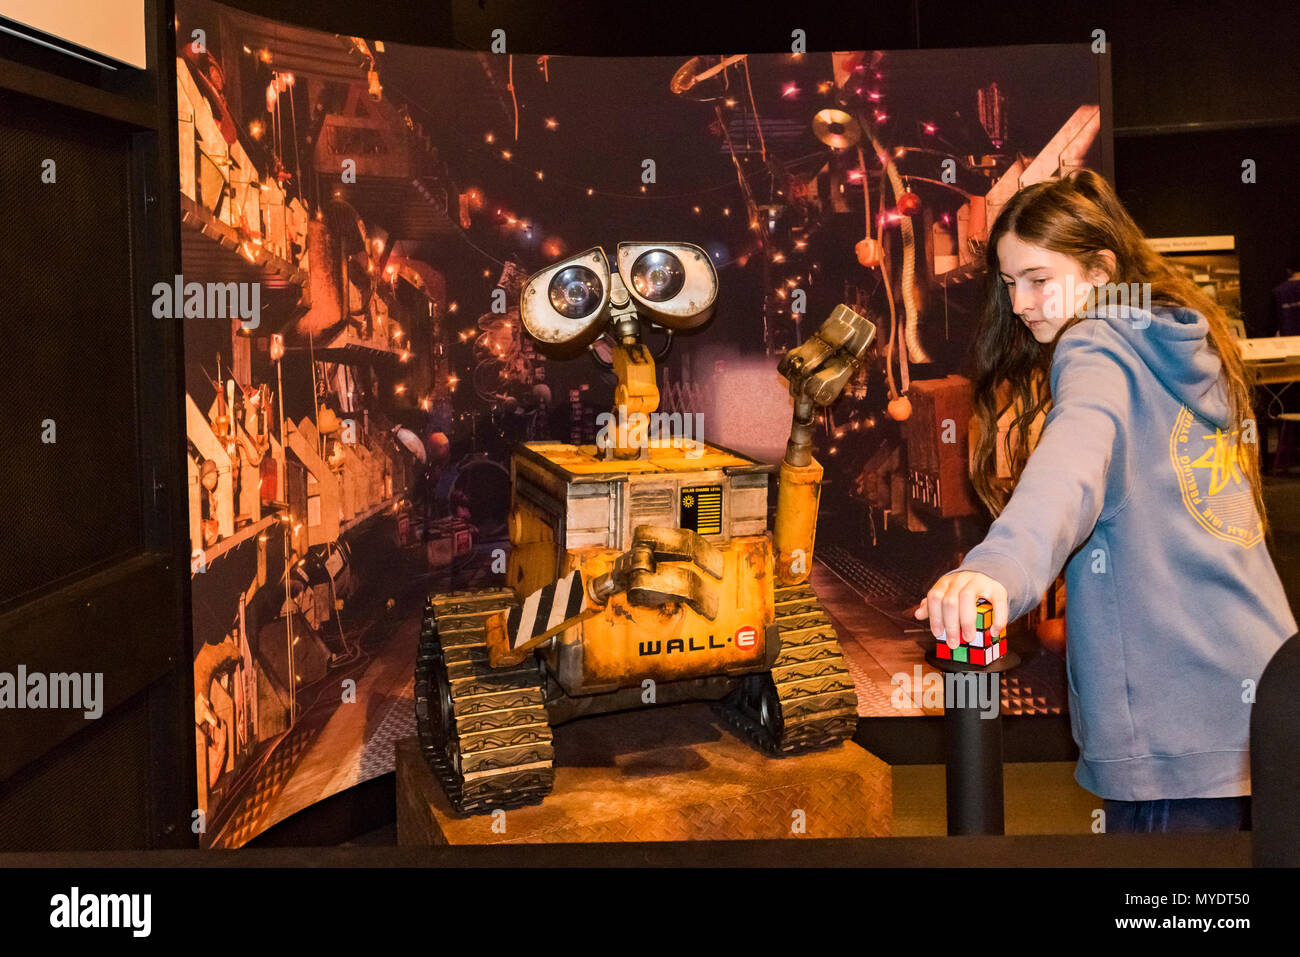 Boy interacts with Wall-E, Pixar exhibit, Telus World of Science, Vancouver, British Columbia, Canada. Stock Photo